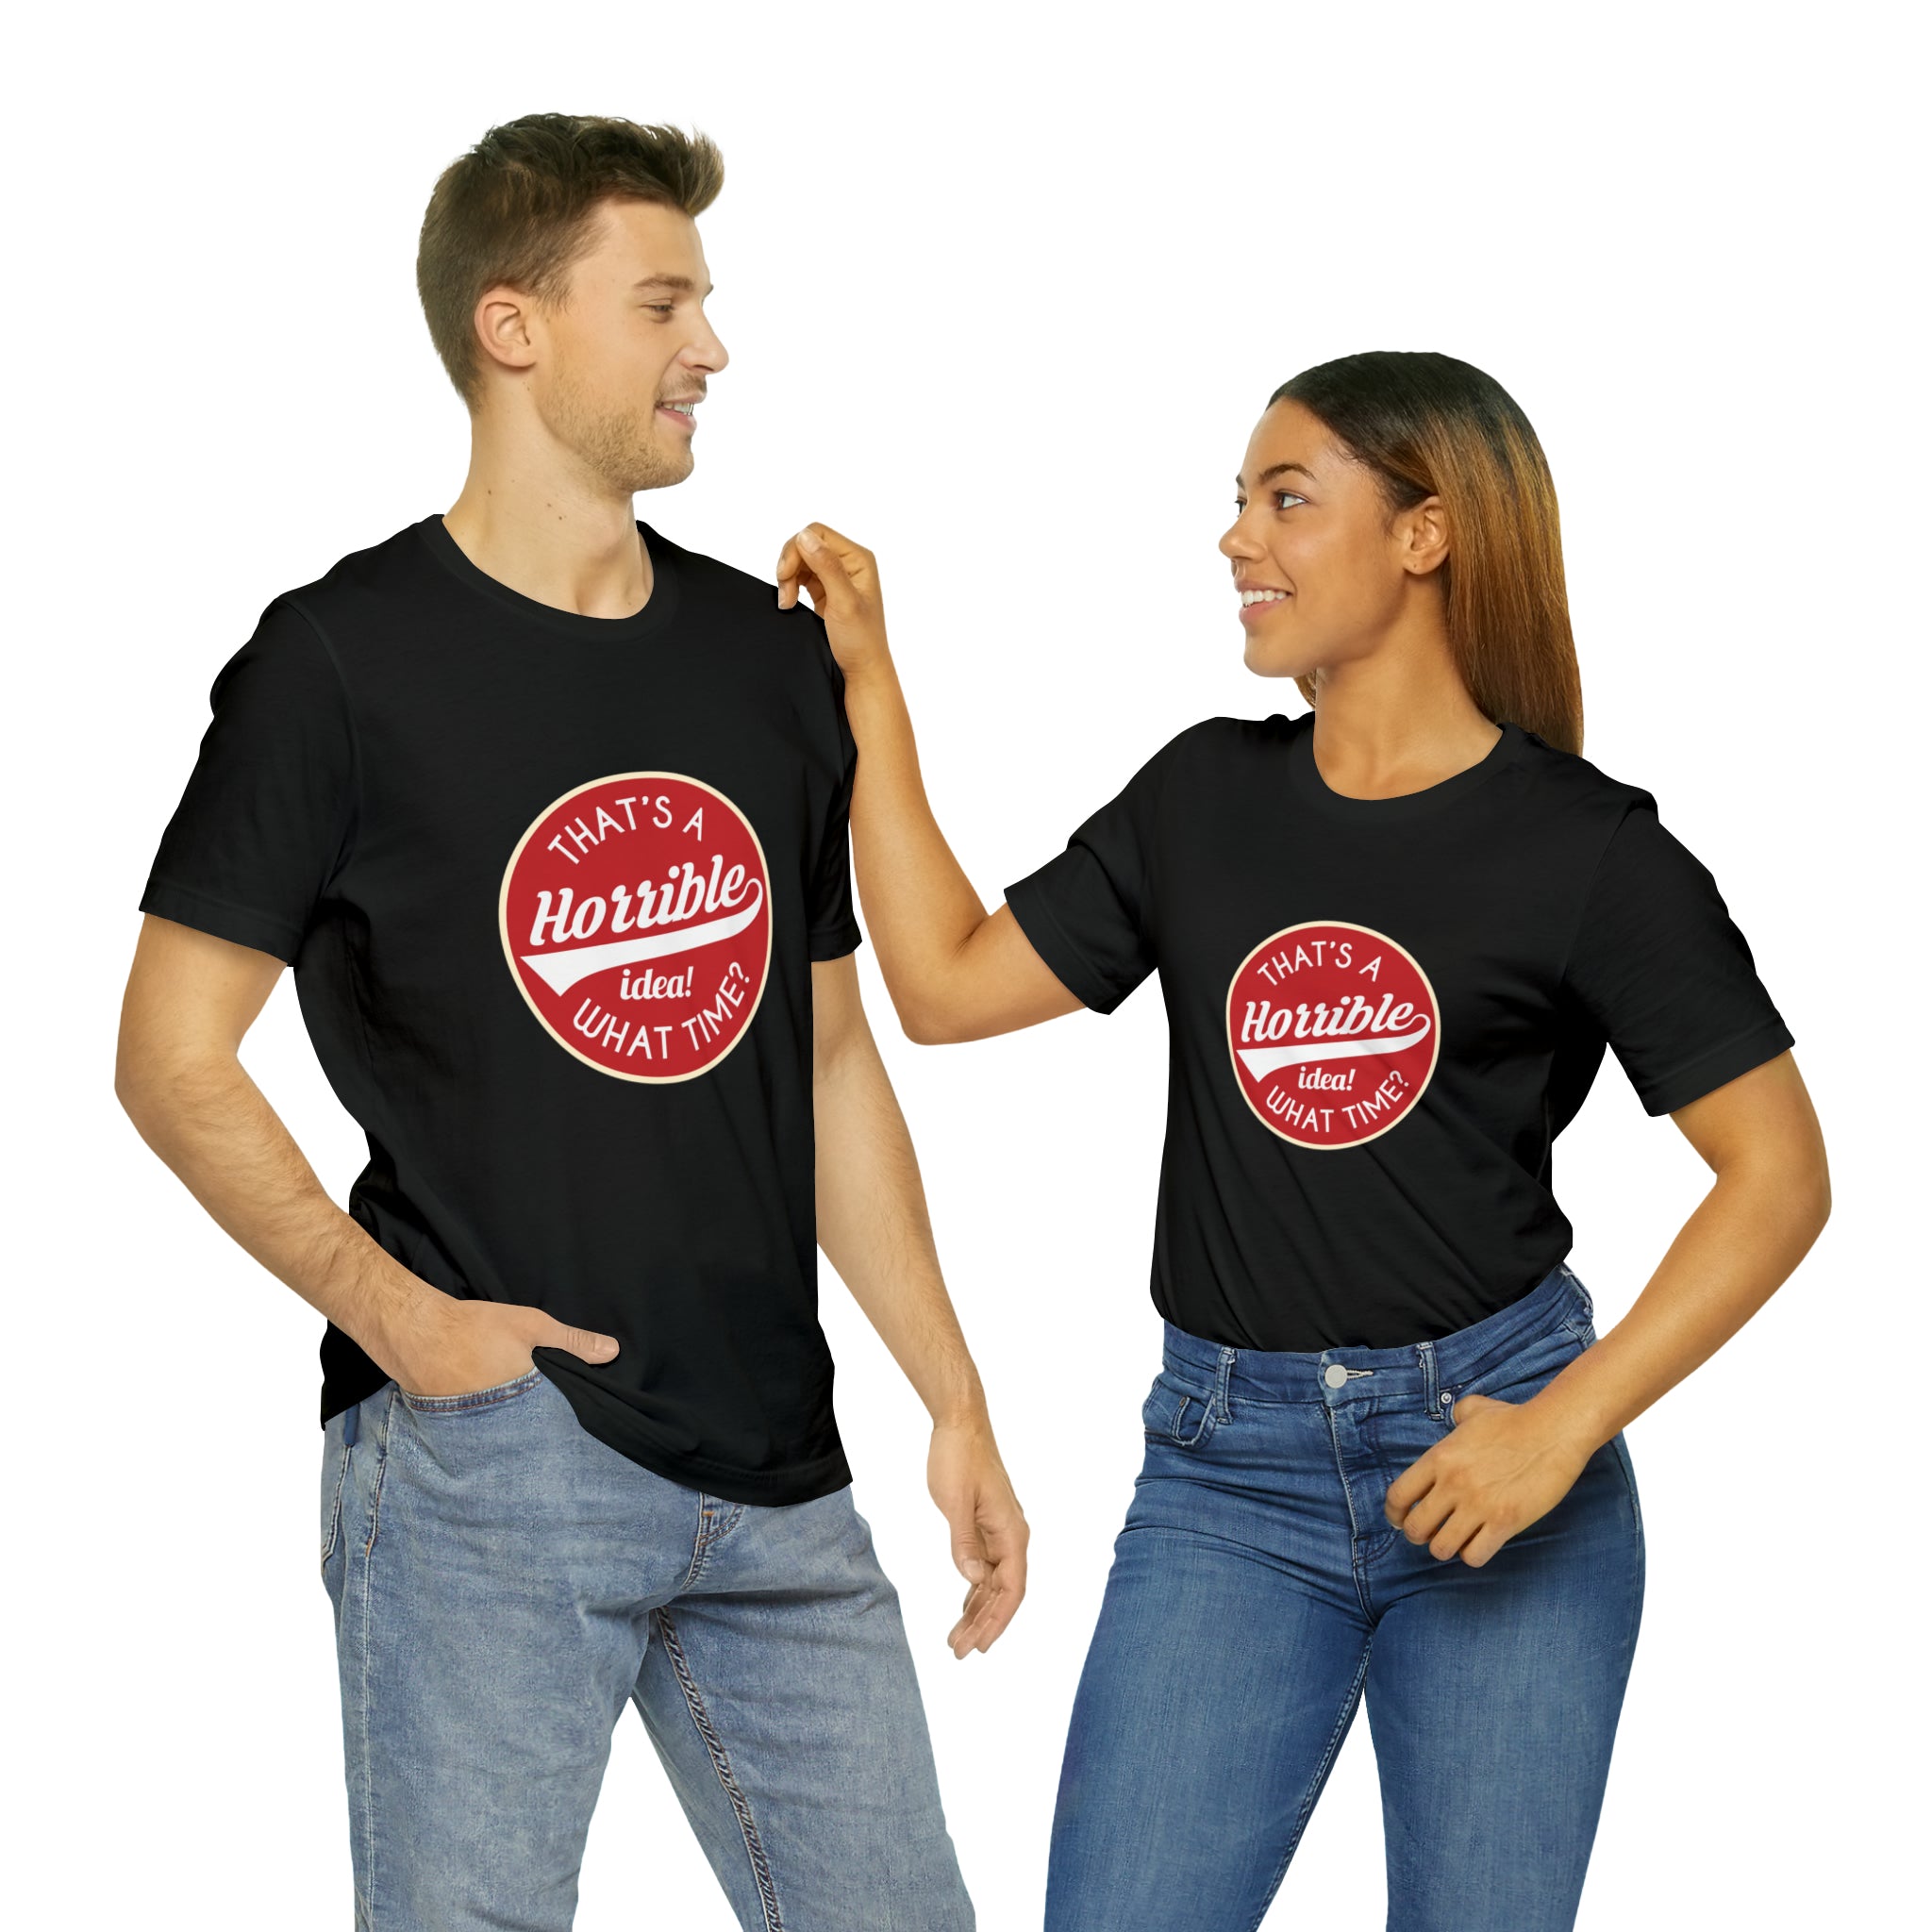 A man and woman standing next to each other wearing "That's a horrible idea - what time" T-shirts, ready to pull off a smart-ass move.